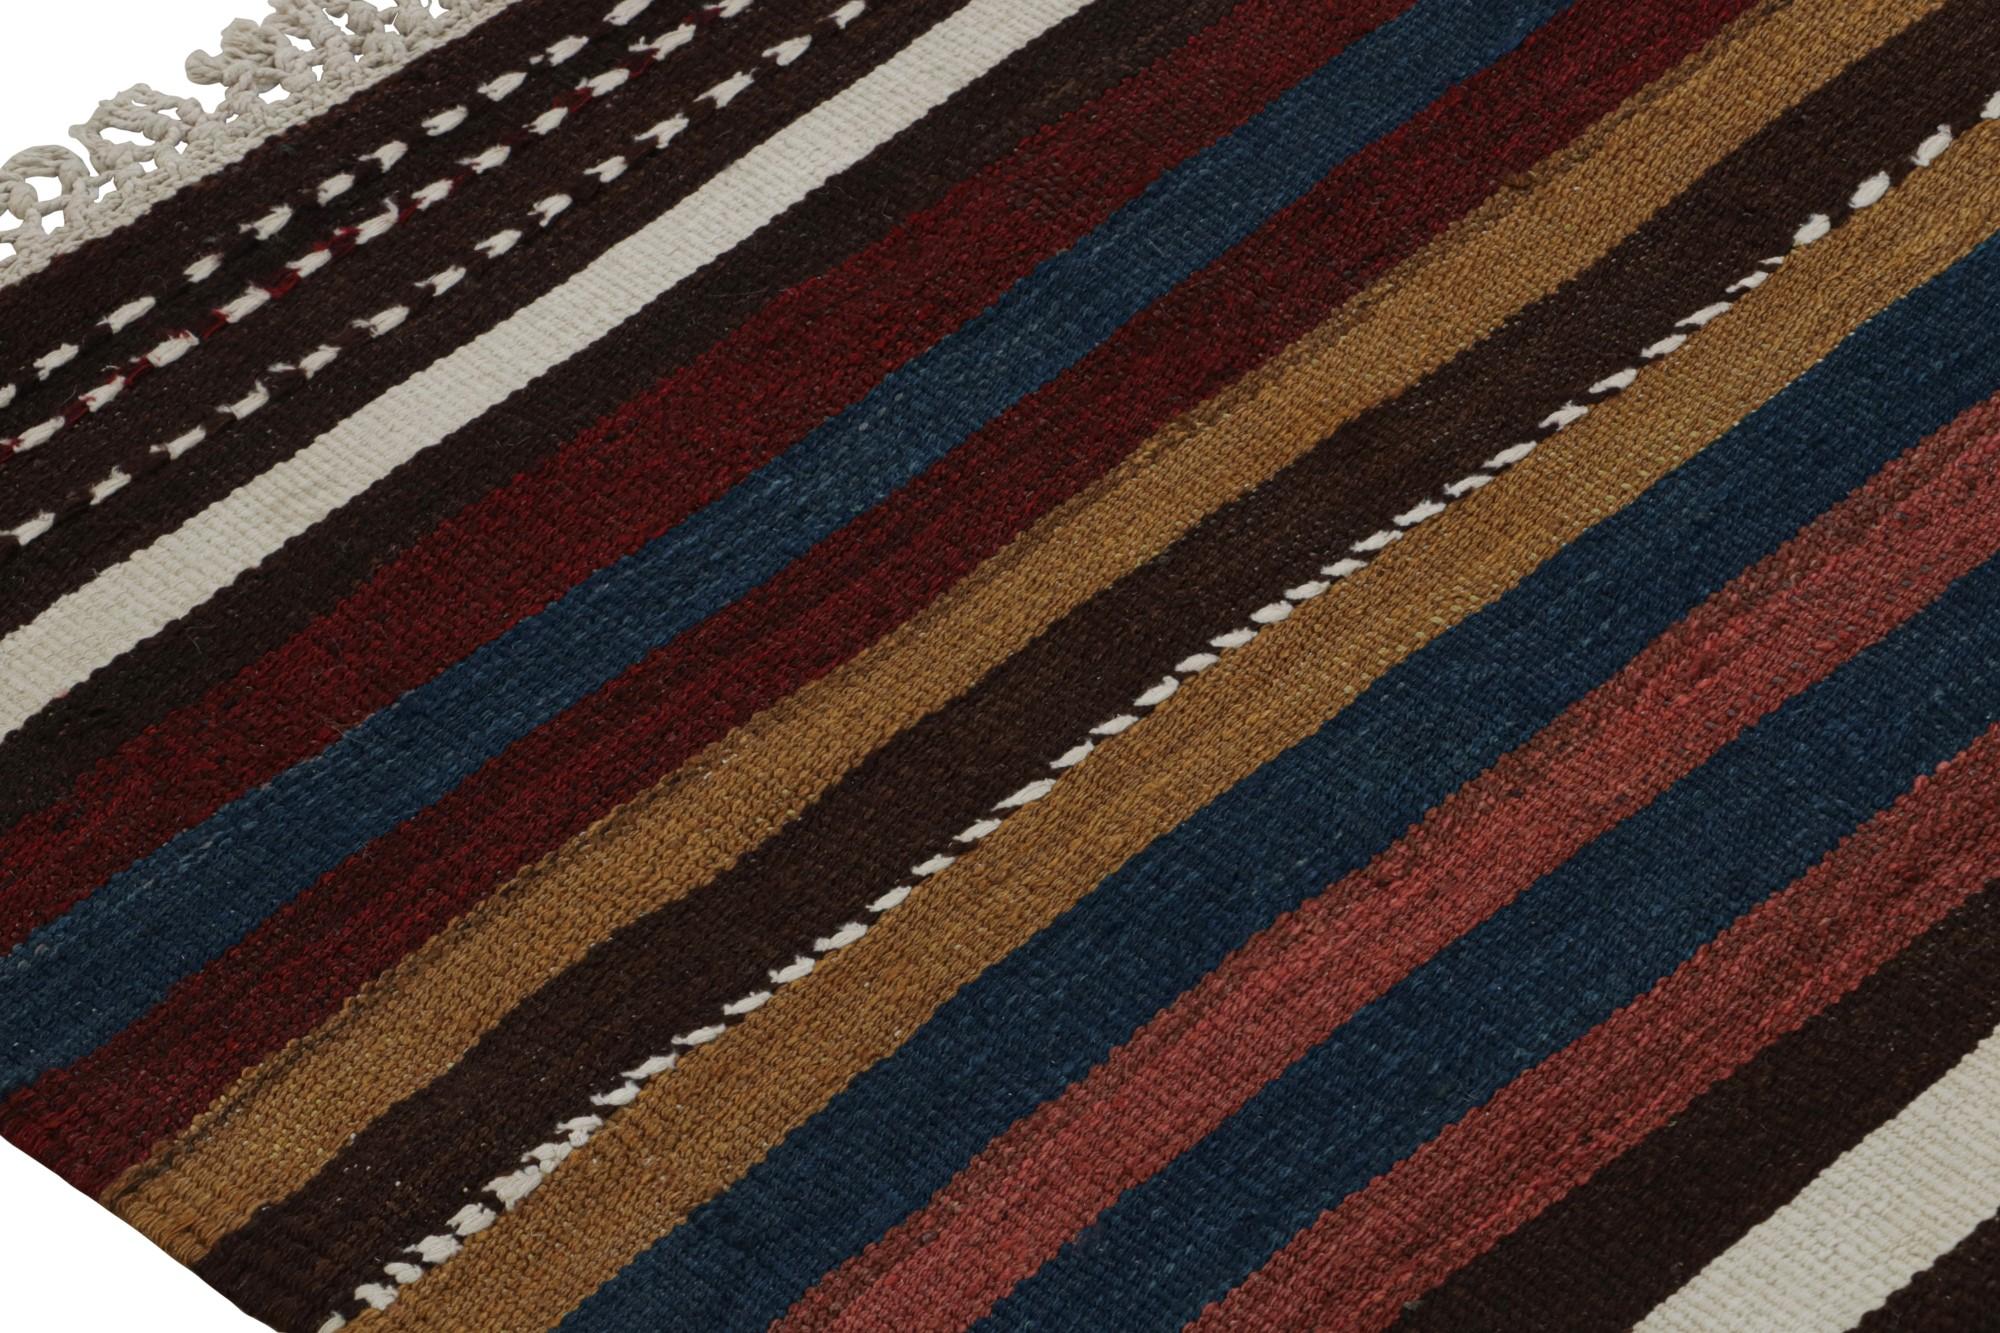 Mid-20th Century Vintage Afghan Tribal Kilim Rug with Colorful Stripes, from Rug & Kilim  For Sale